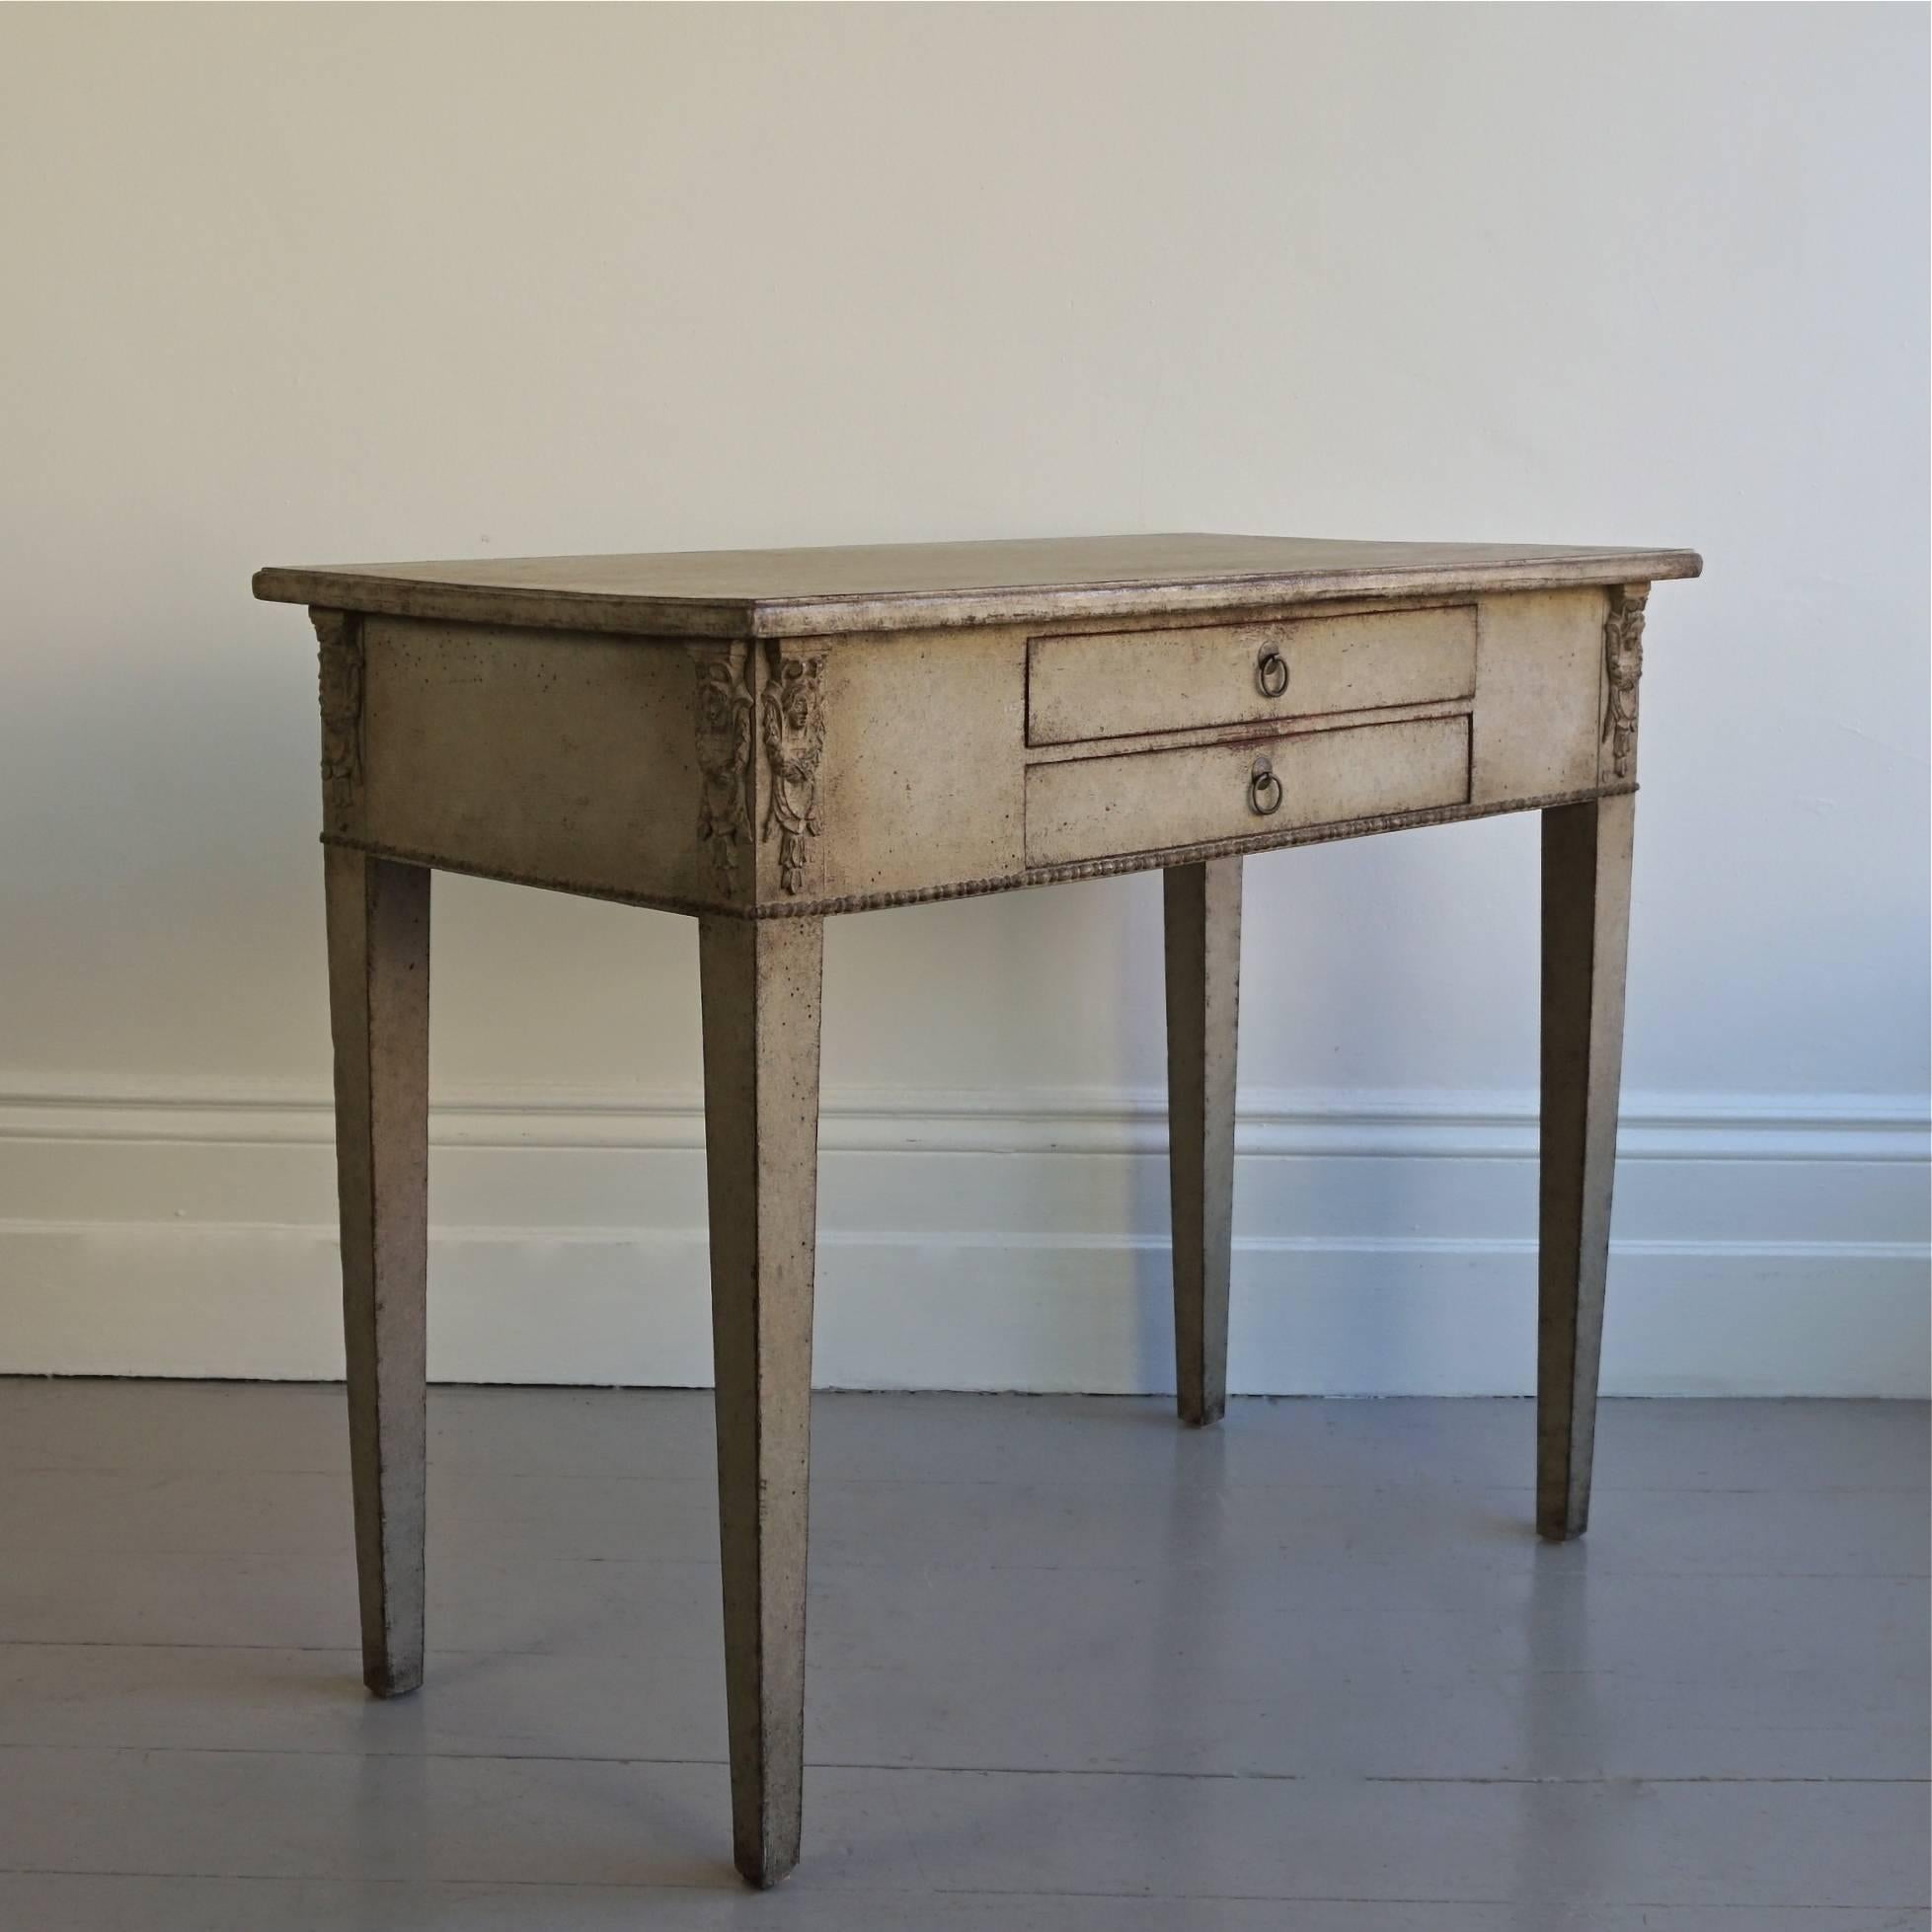 Hand-Carved Early 19th Century Swedish Gustavian Side Table